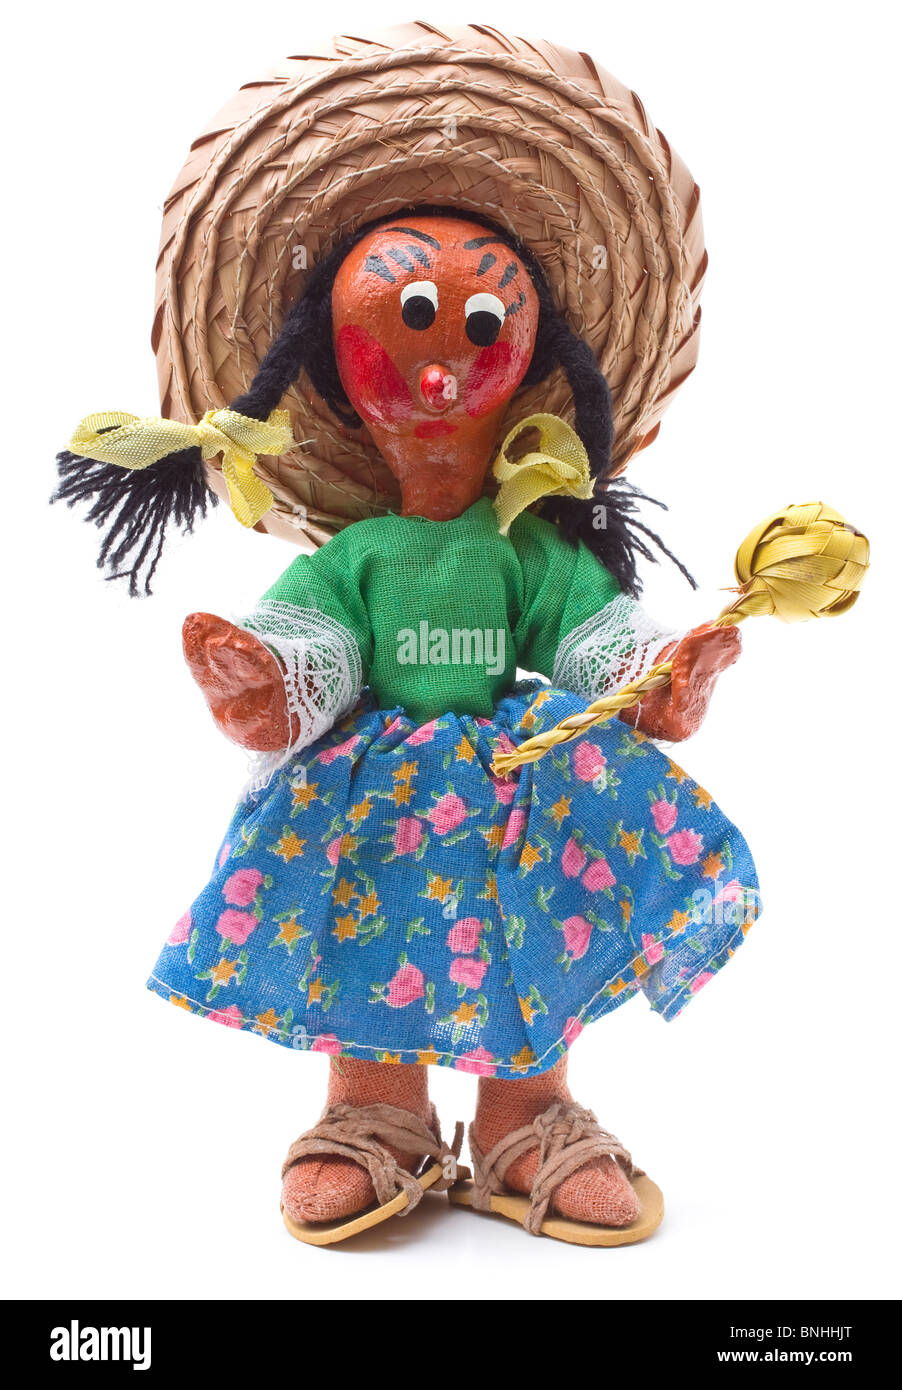 Doll from Mexico Stock Photo